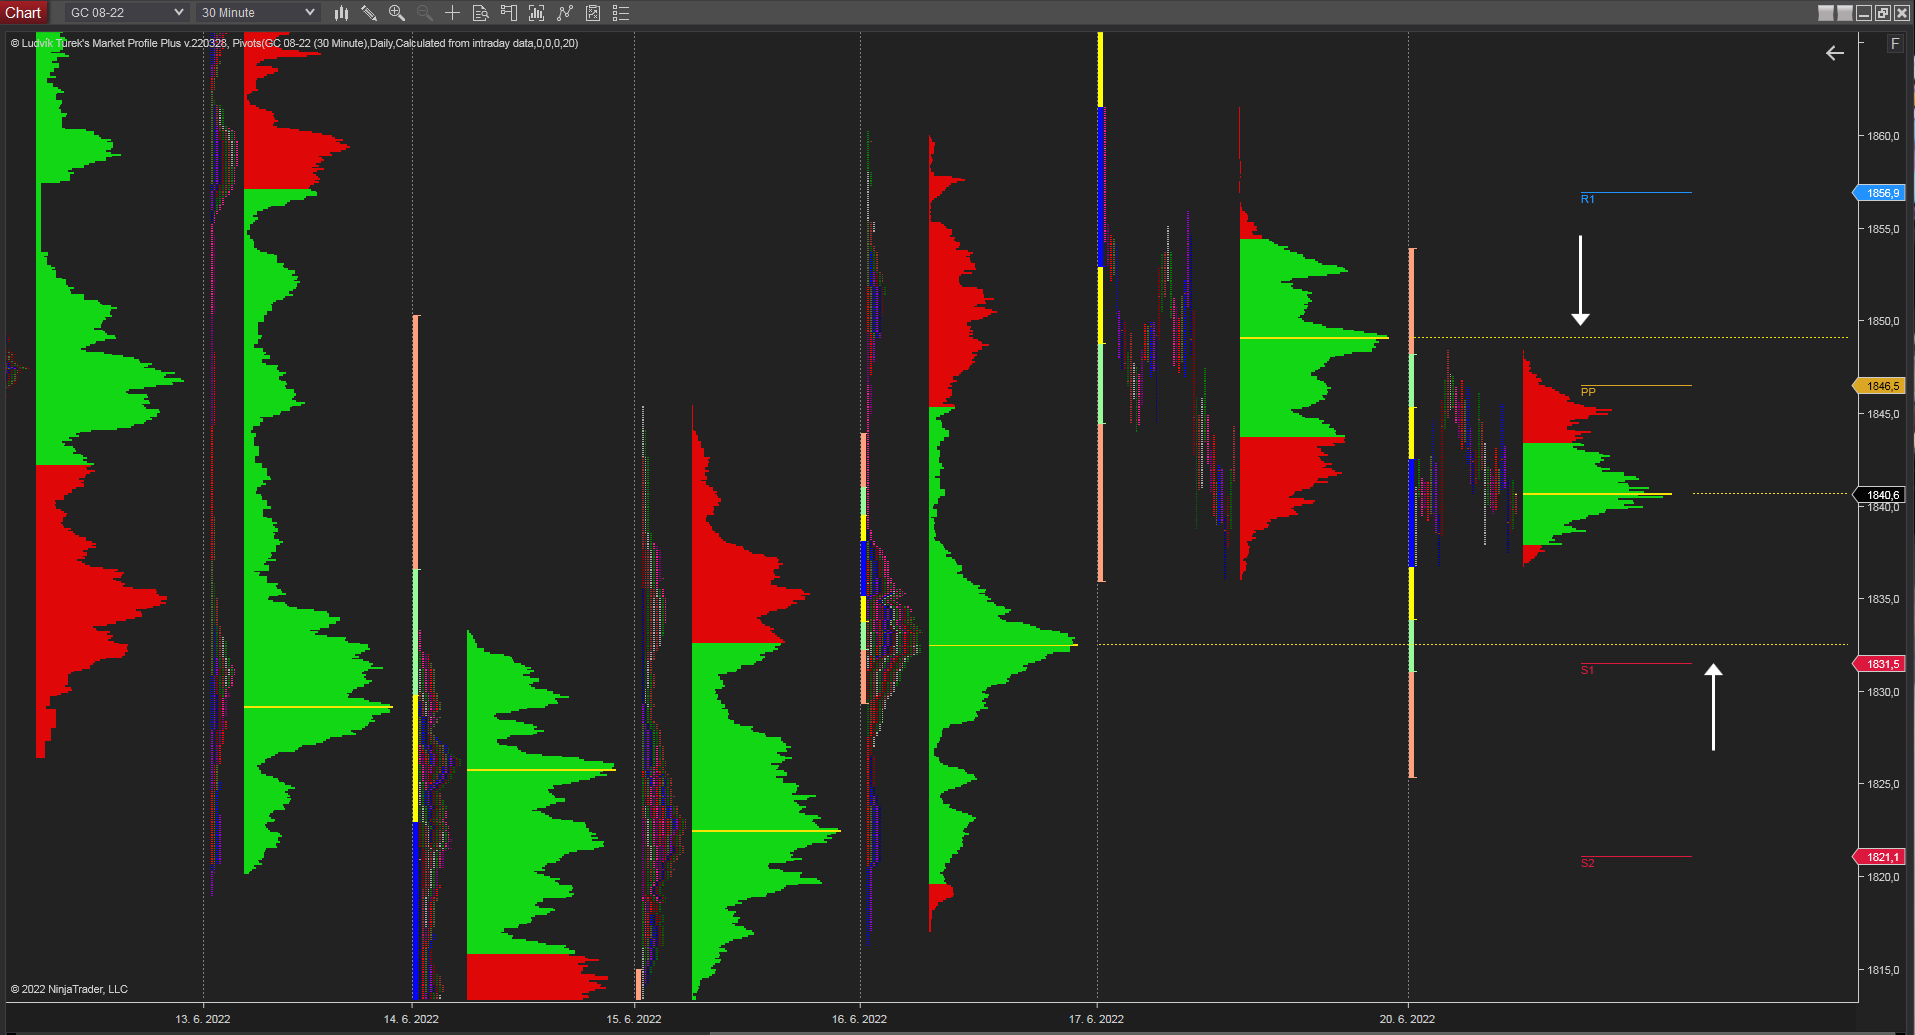 30 minutes chart of GC (Gold Futures), Market profile indicator. Source: Author's analysis